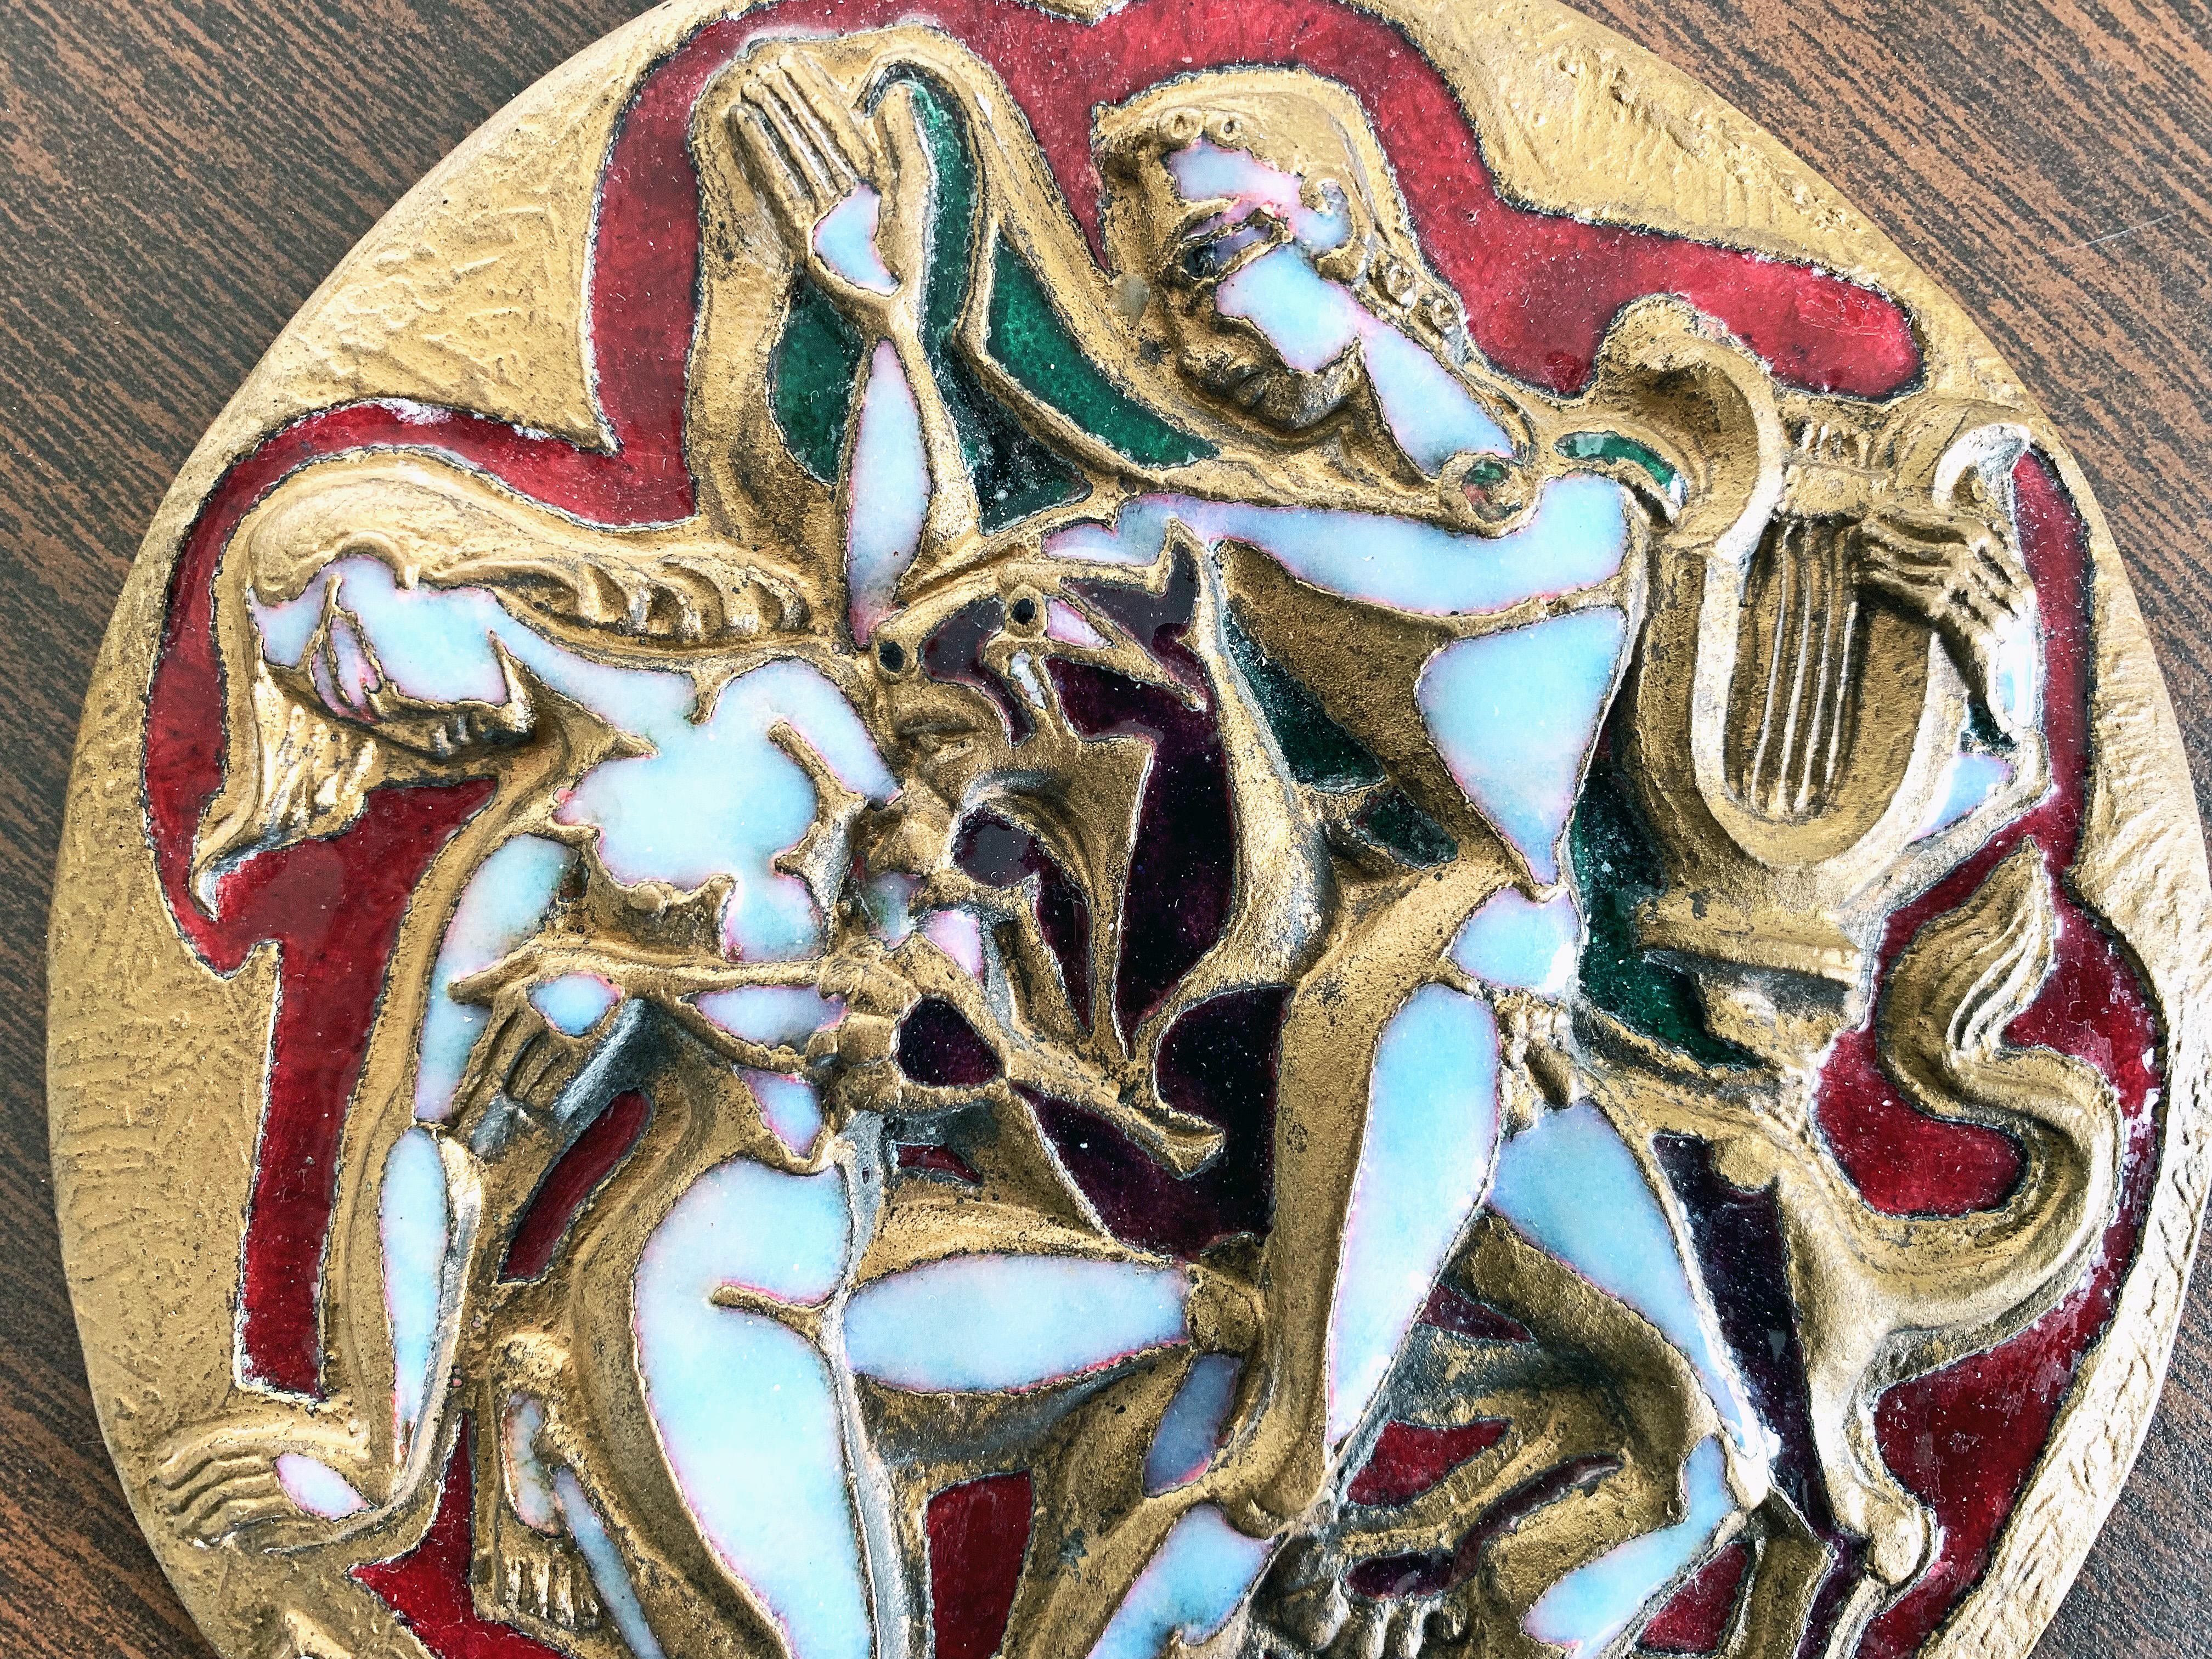 Boldly sculpted in gilded bronze and gorgeously enriched with several shades of enamel, including mother of pearl and ruby red, this midcentury rondel depicts two nude figures Orpheus and Eurydice with a lion rearing between them. Orpheus is